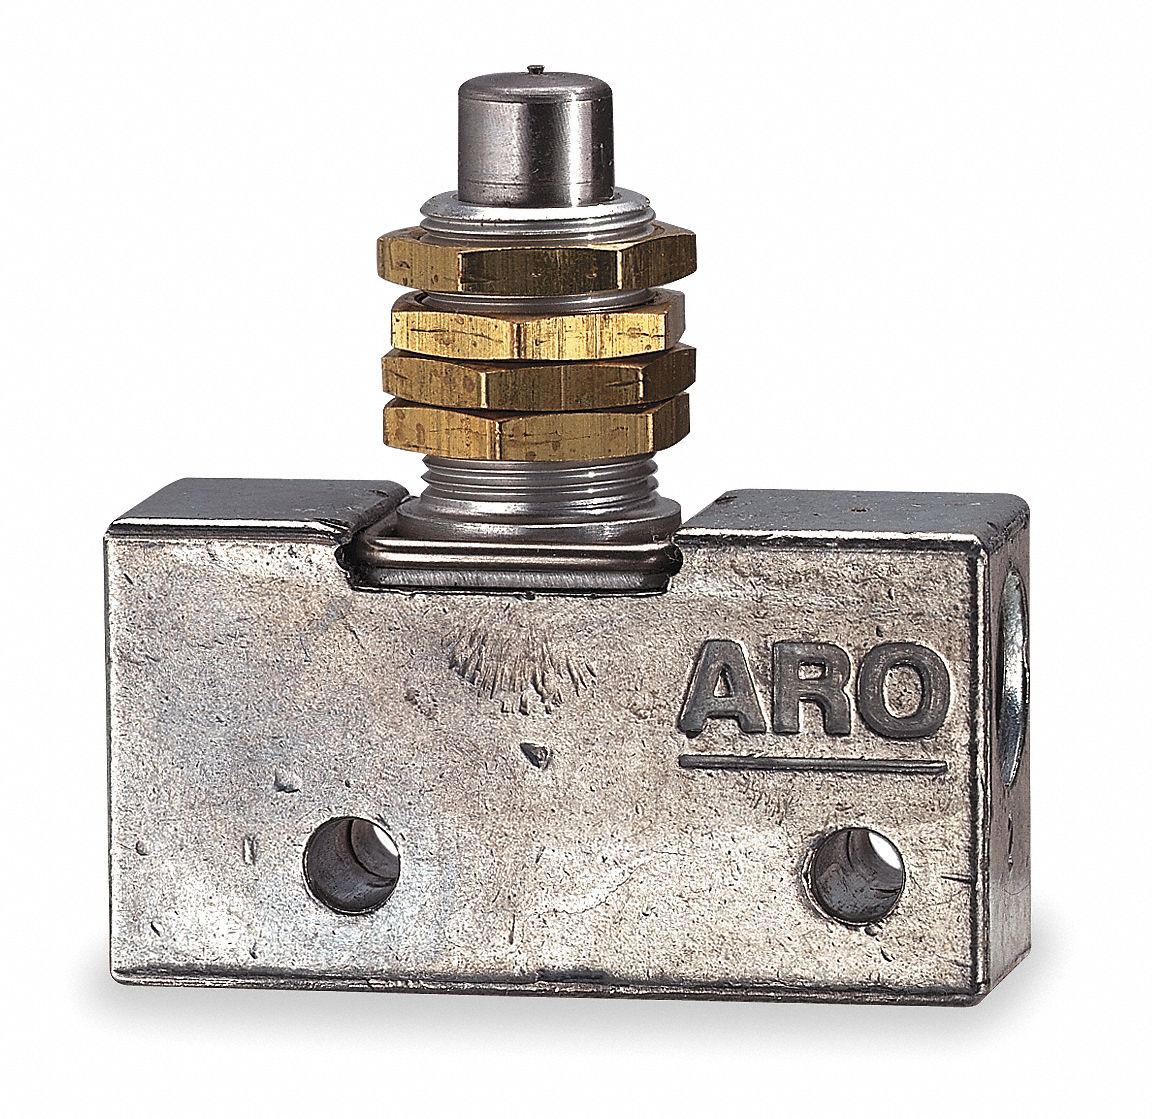 ARO 1/8" Manual Air Control Valve with 3 Way, 2 Position Air Valve Type   Manual Air Control Valves   2F903|214 C